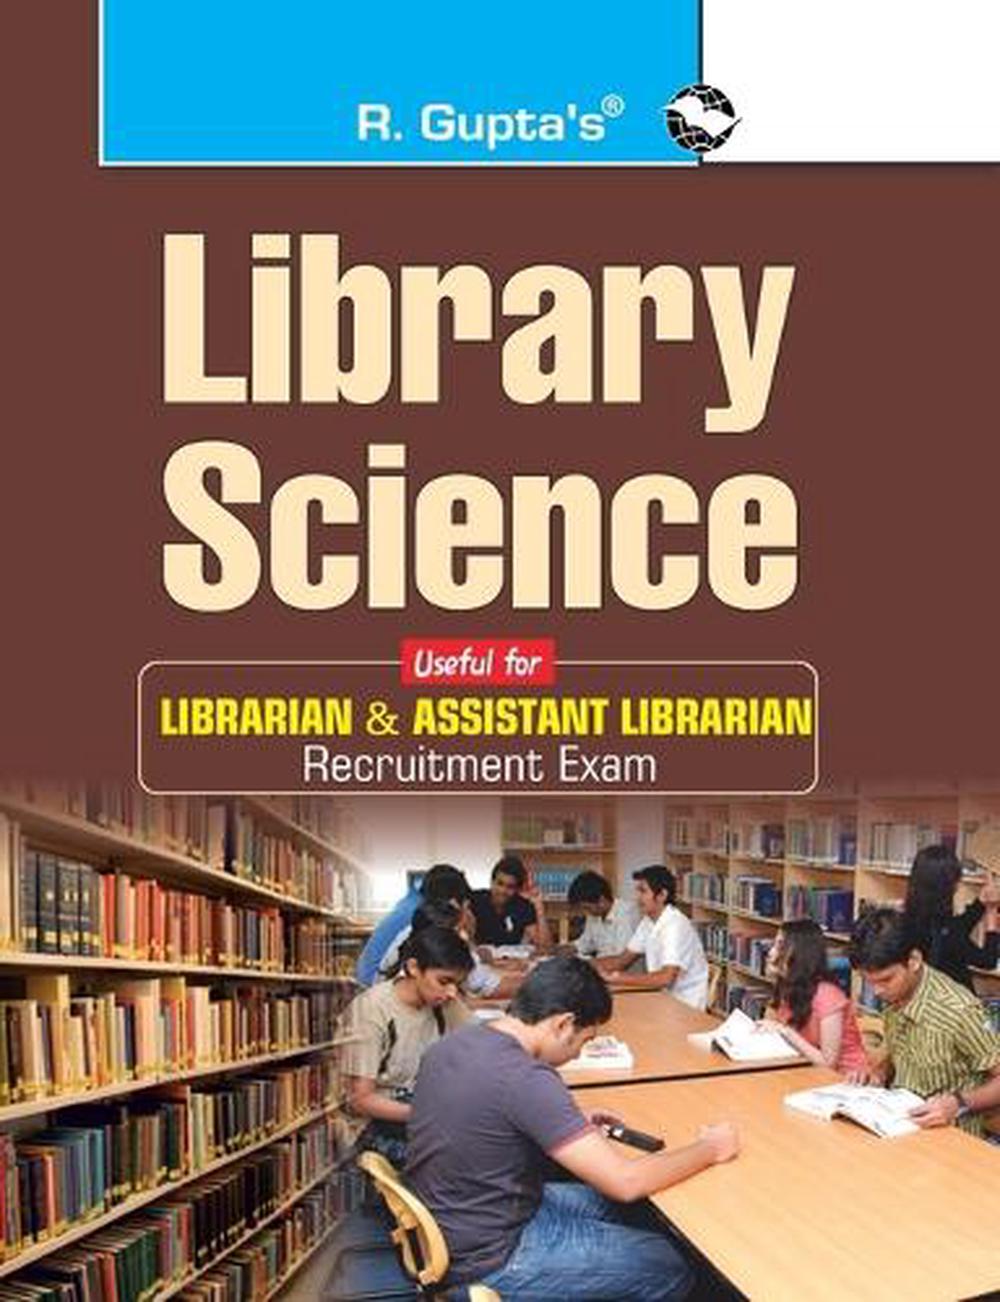 research topics on library science